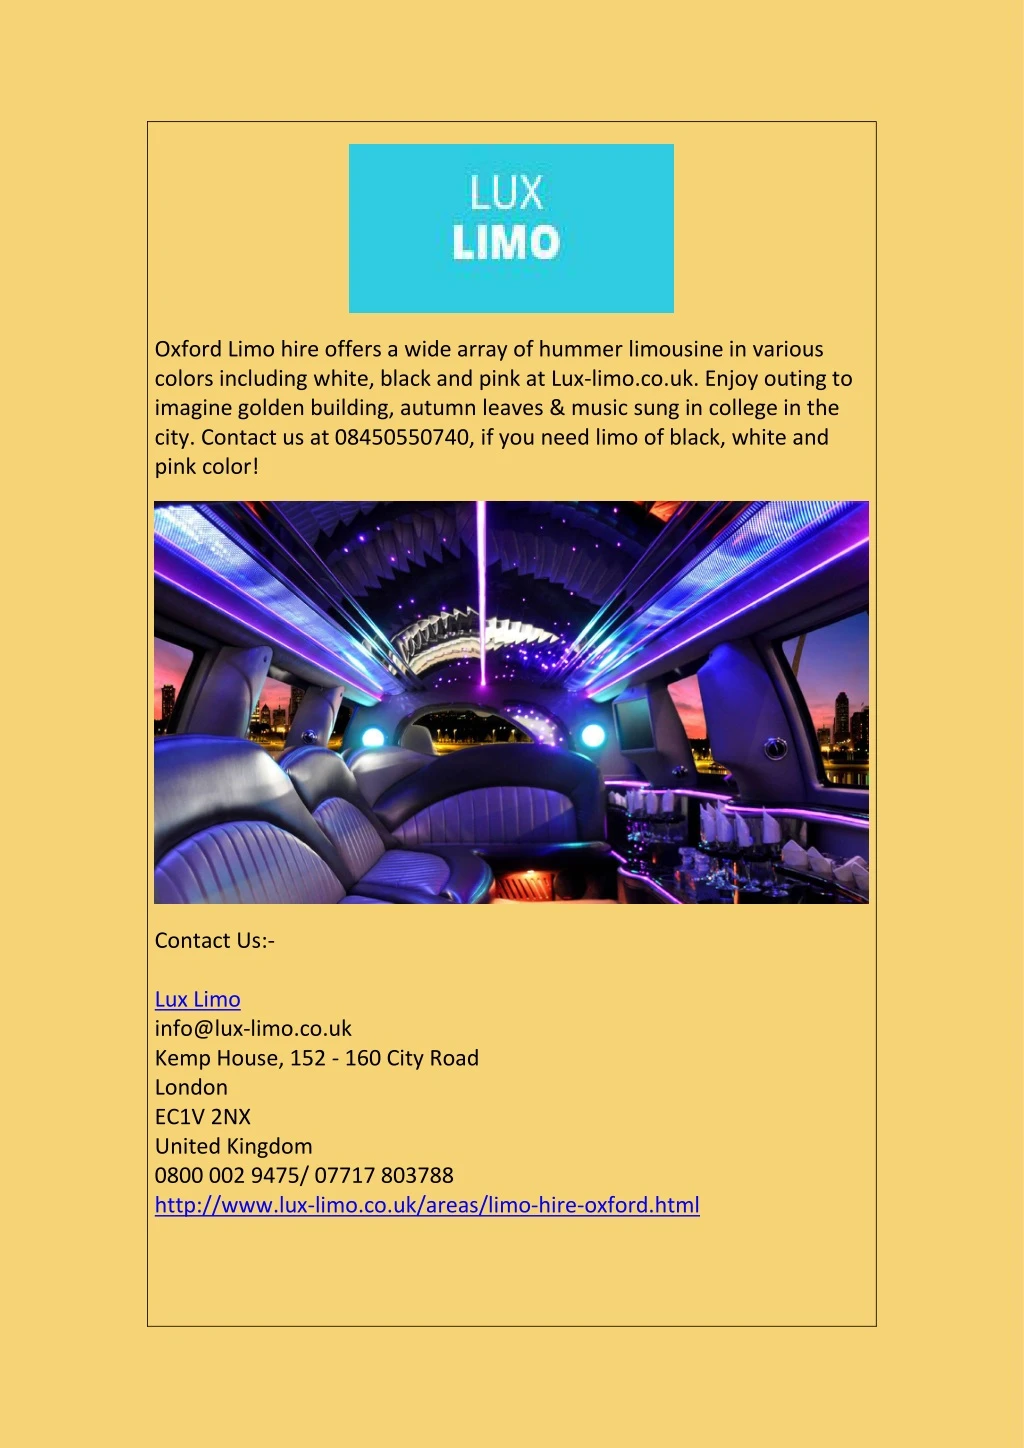 oxford limo hire offers a wide array of hummer